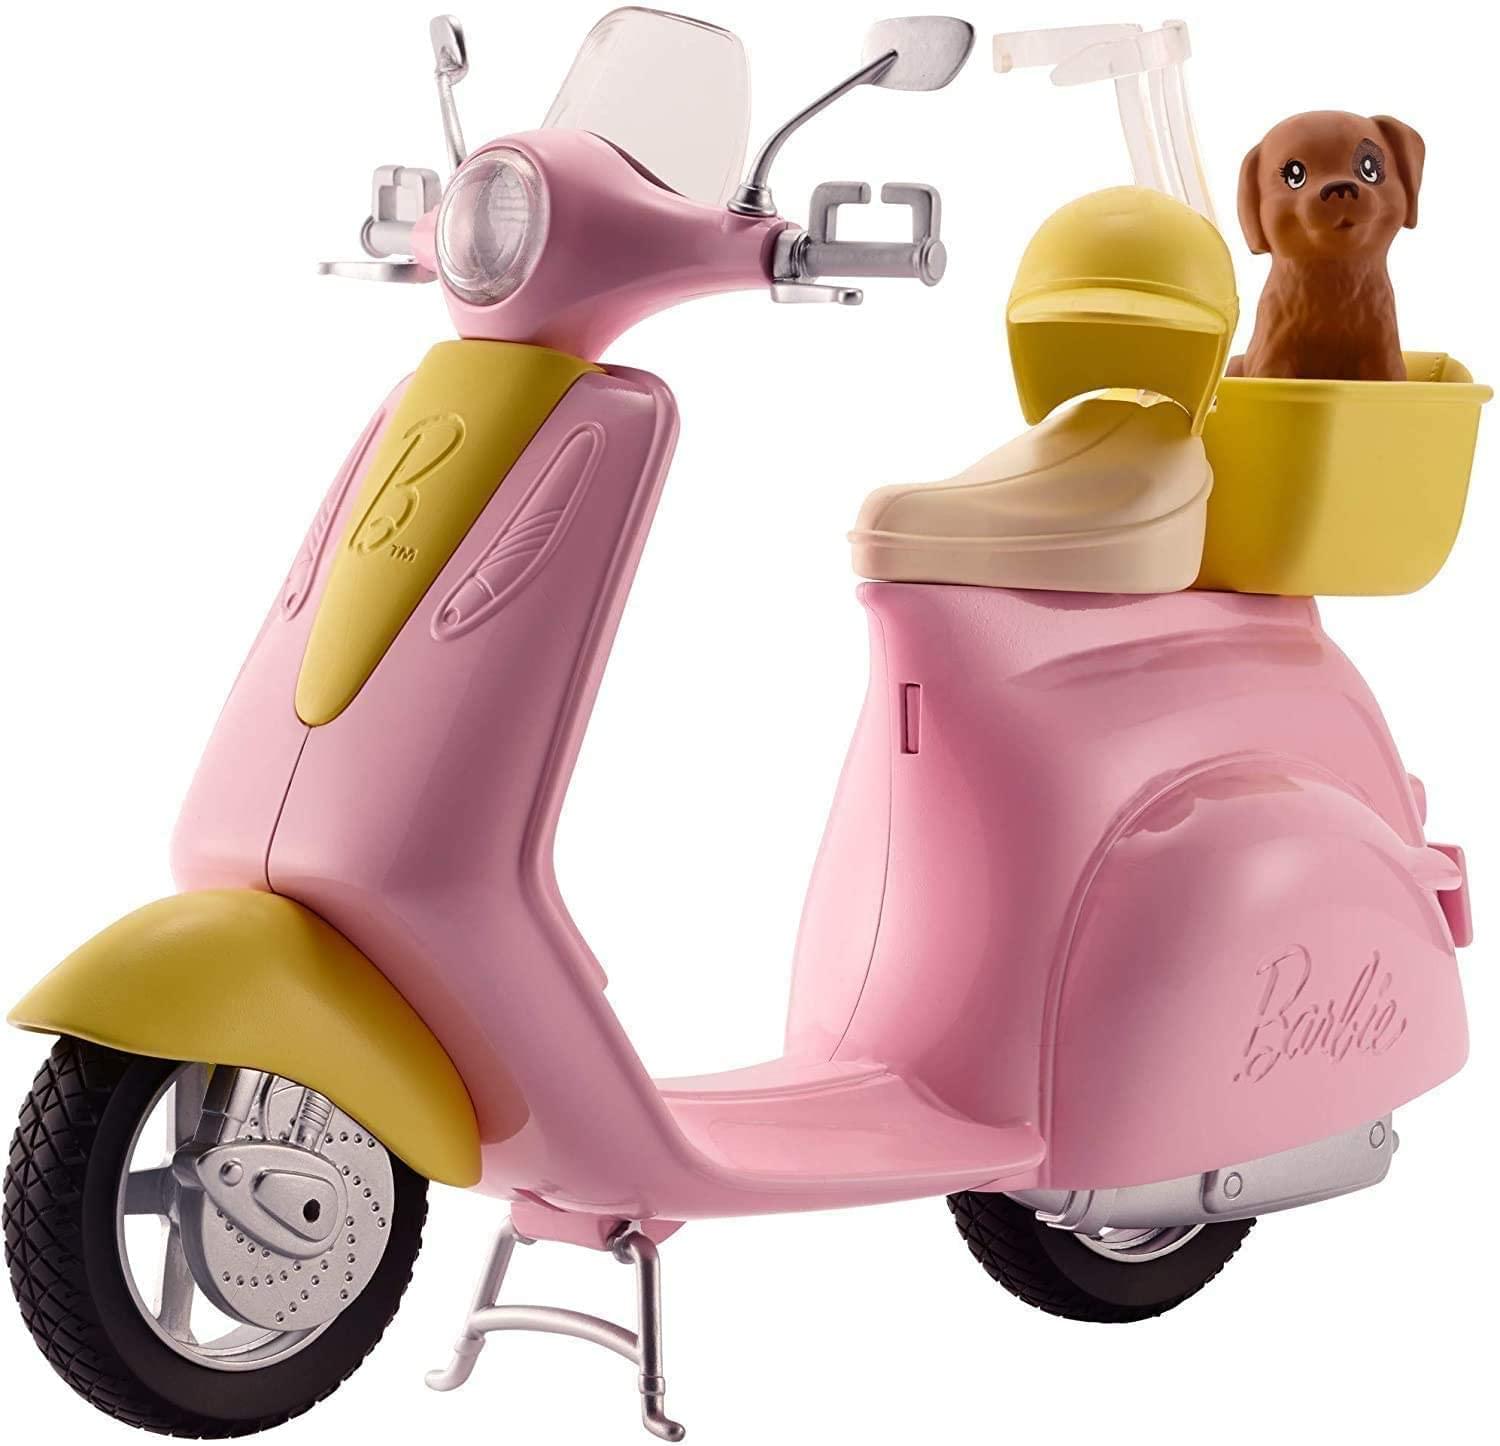 Barbie Pink Moped Scooter with Puppy